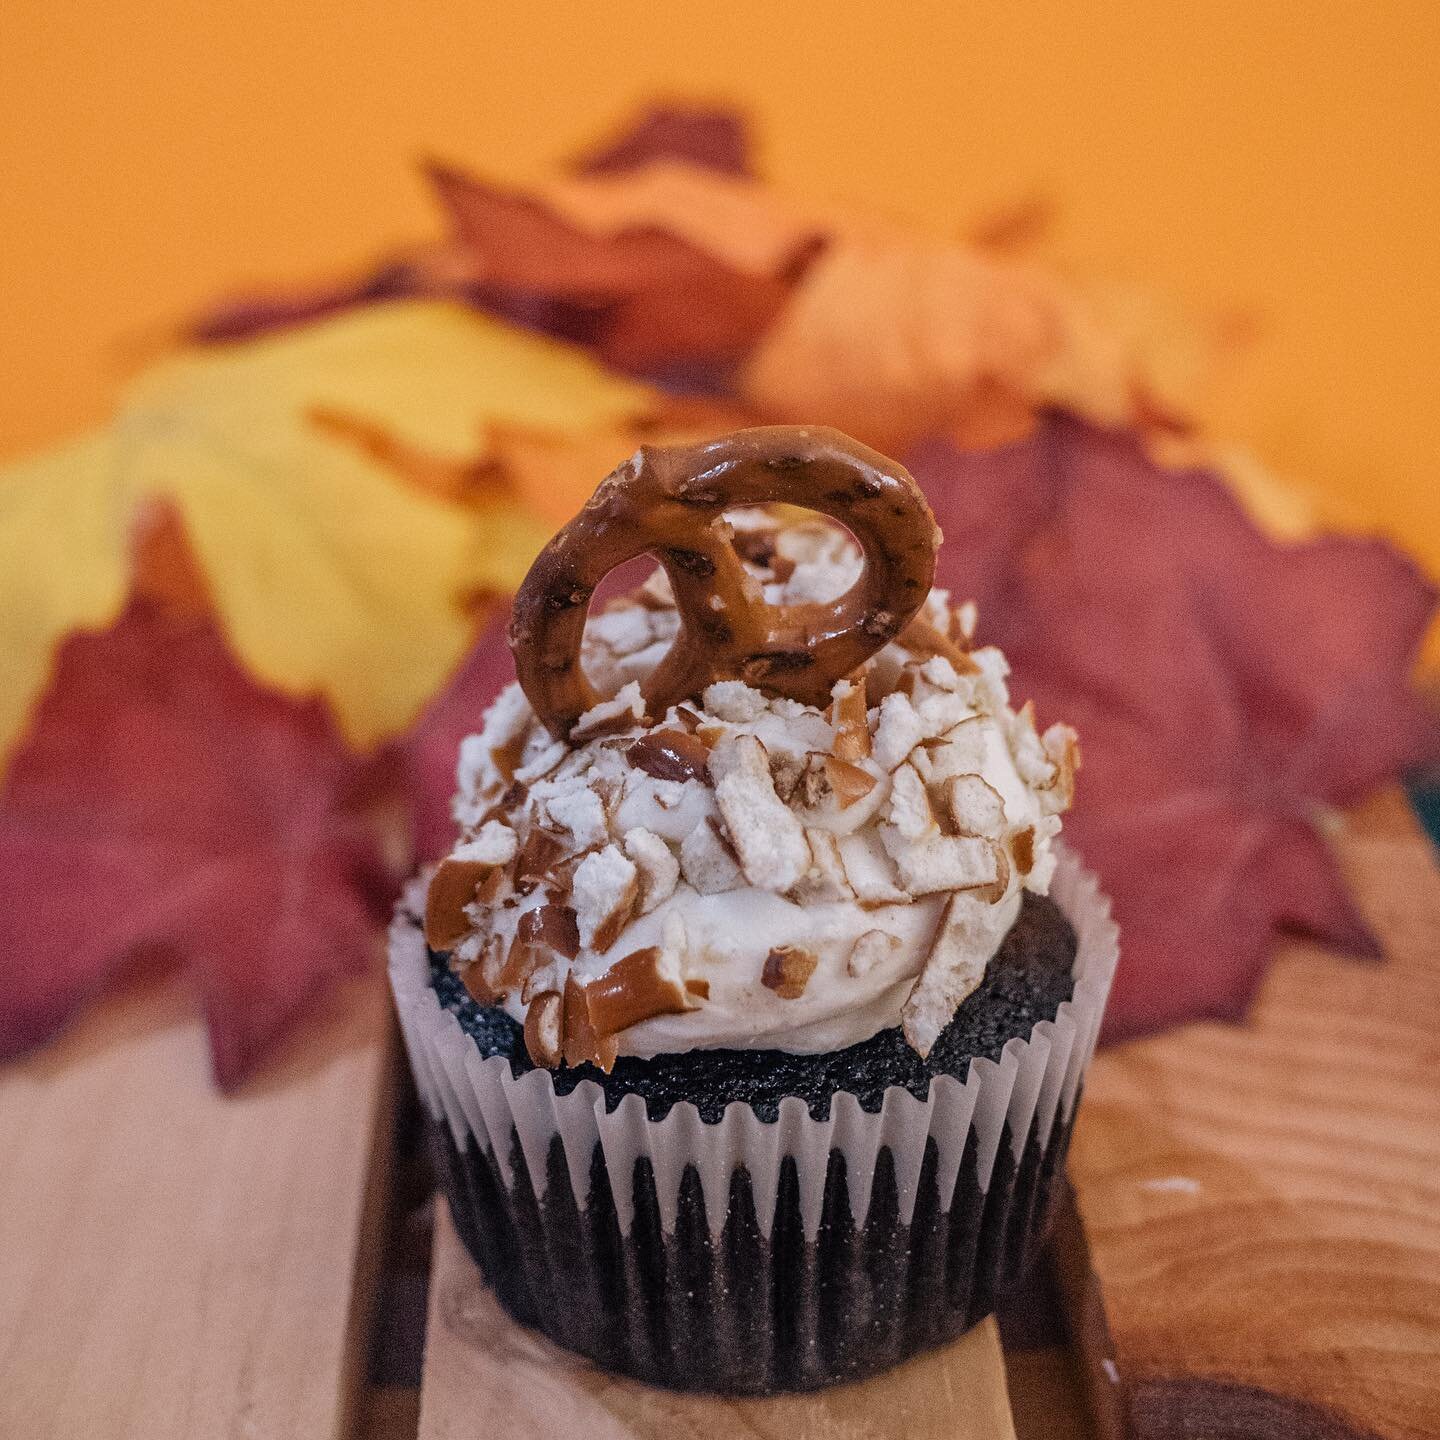 Salted Caramel Stout &amp; other Fall flavors are perfect for Halloween and Friendsgiving parties!! Order now before we&rsquo;re all booked! 🍂🍁
.
.
.
.
.
.
.
#phillybaker #phillybakery #boozy #cupcakes #eatadelphia #foodphotography #philly #phillyg